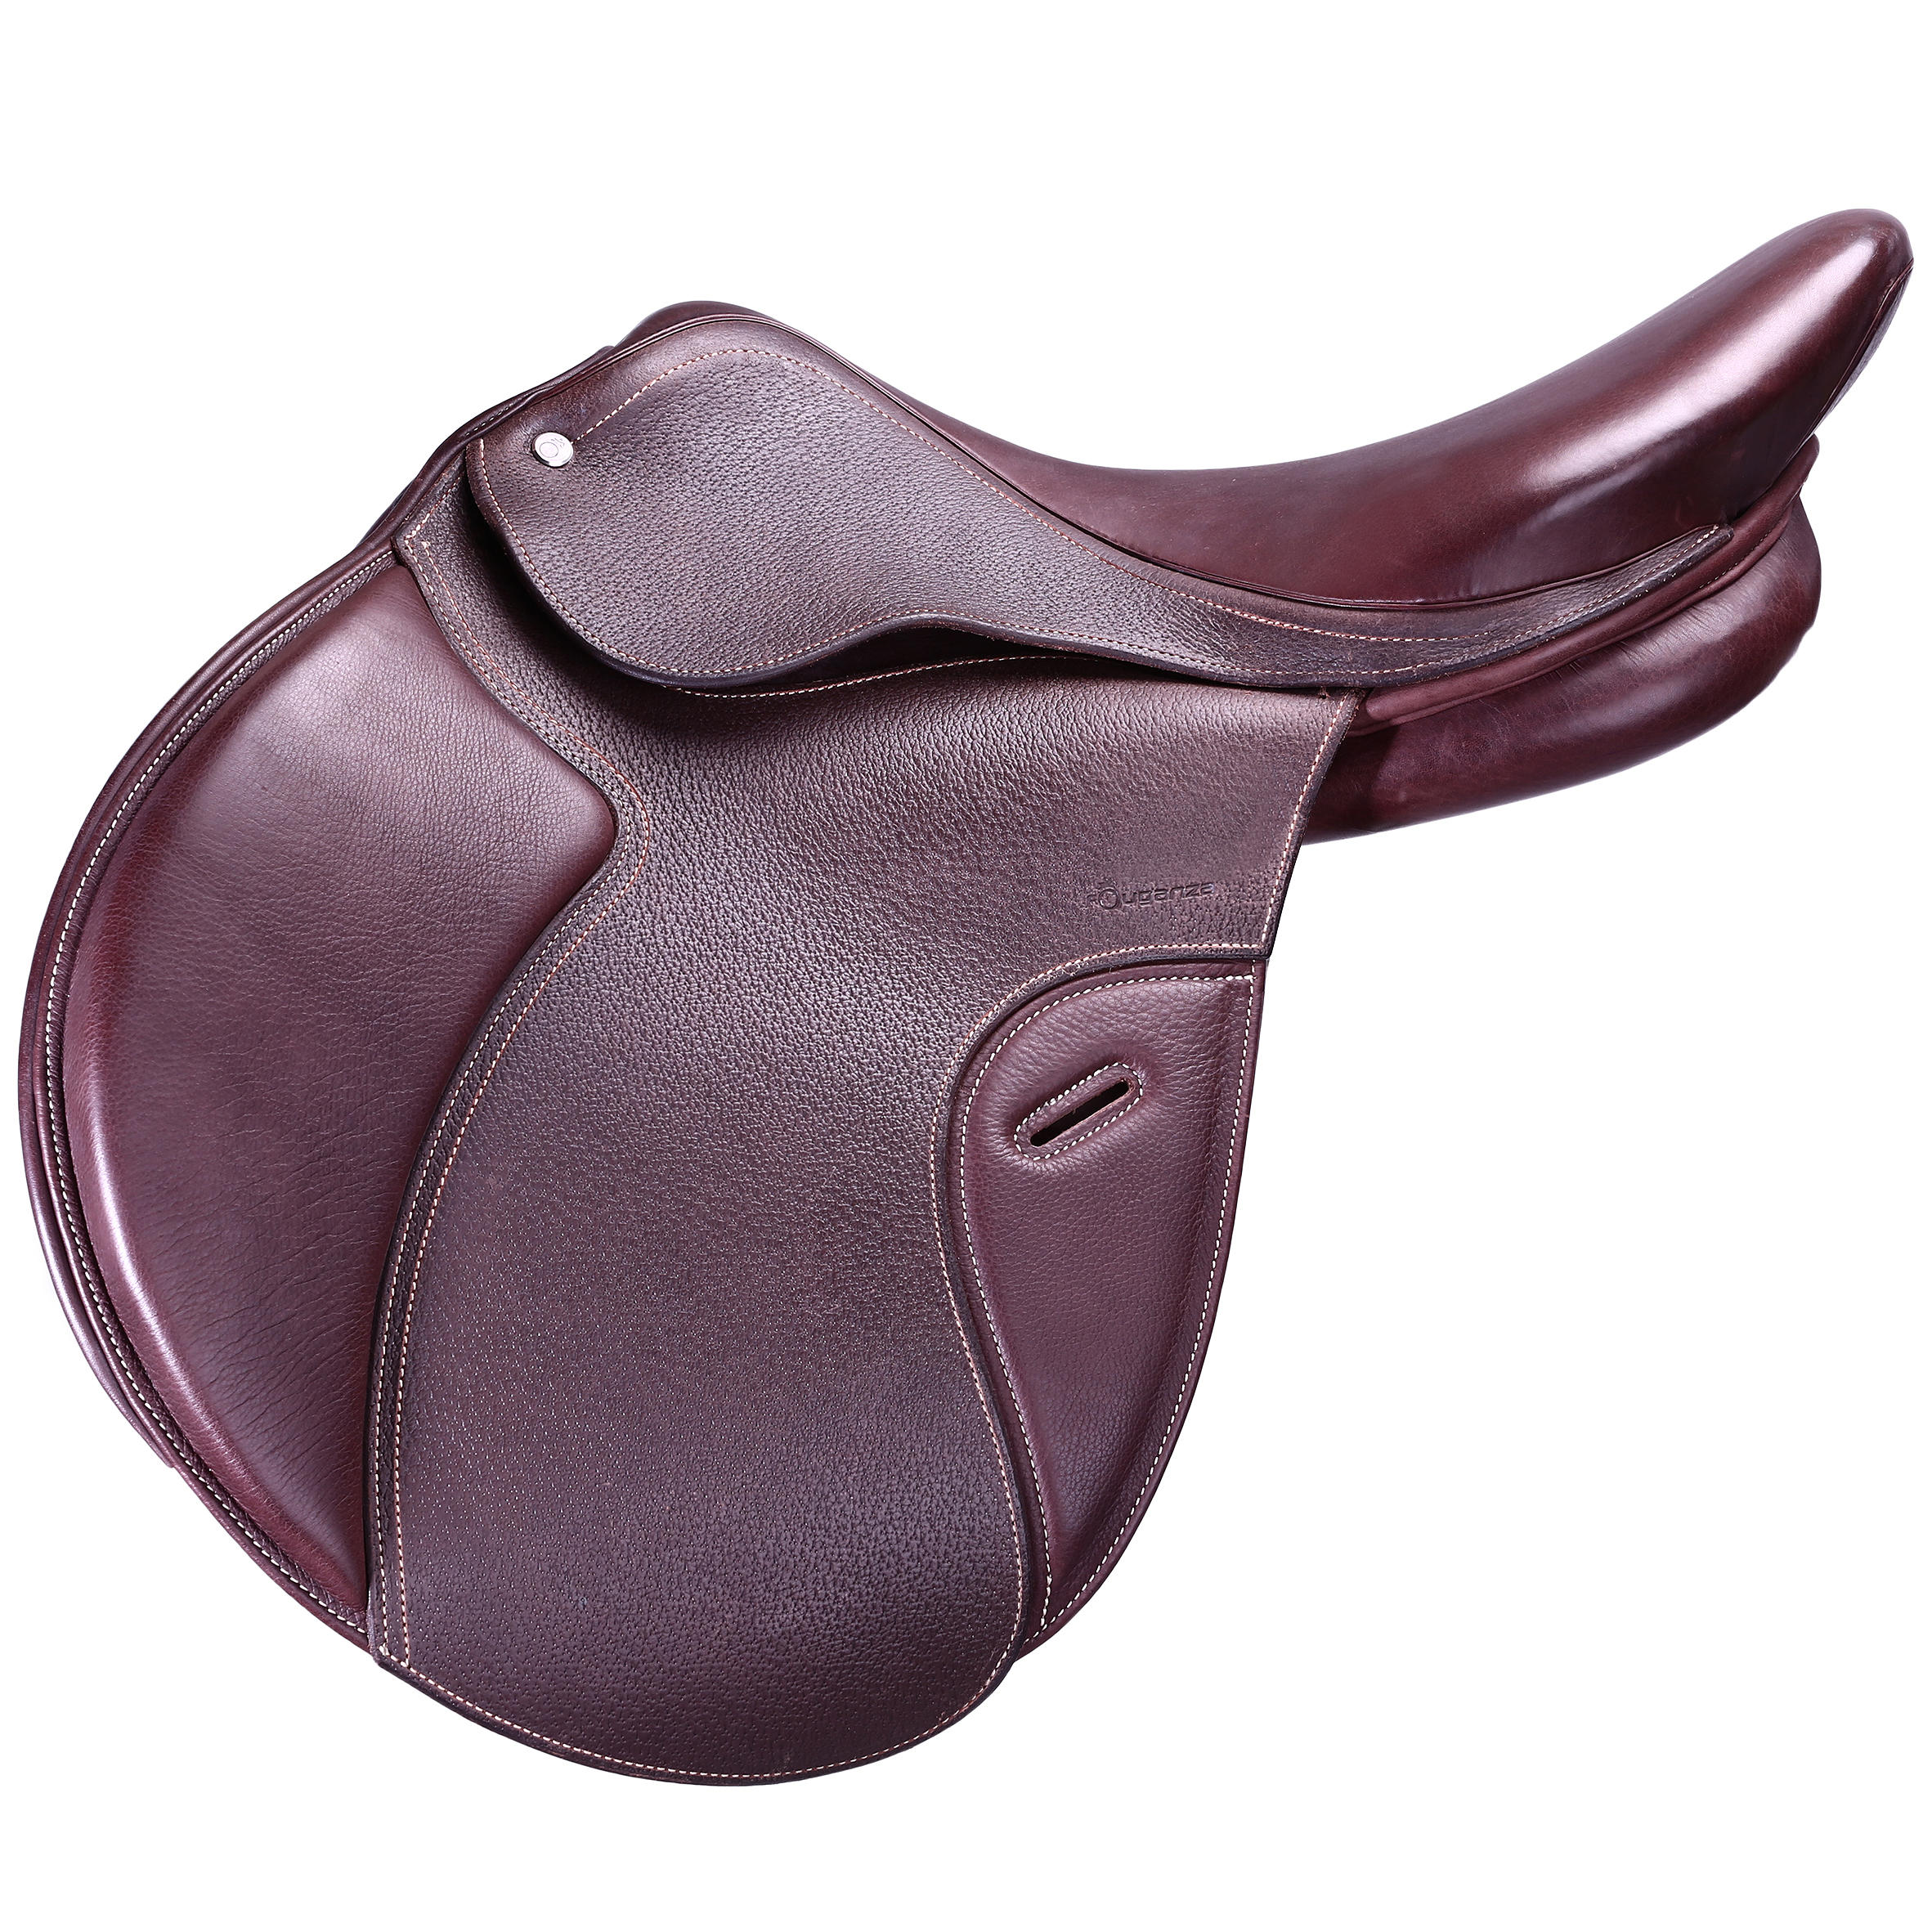 17.5" Versatile Leather Horse Riding Saddle for Horse - Brown 4/15